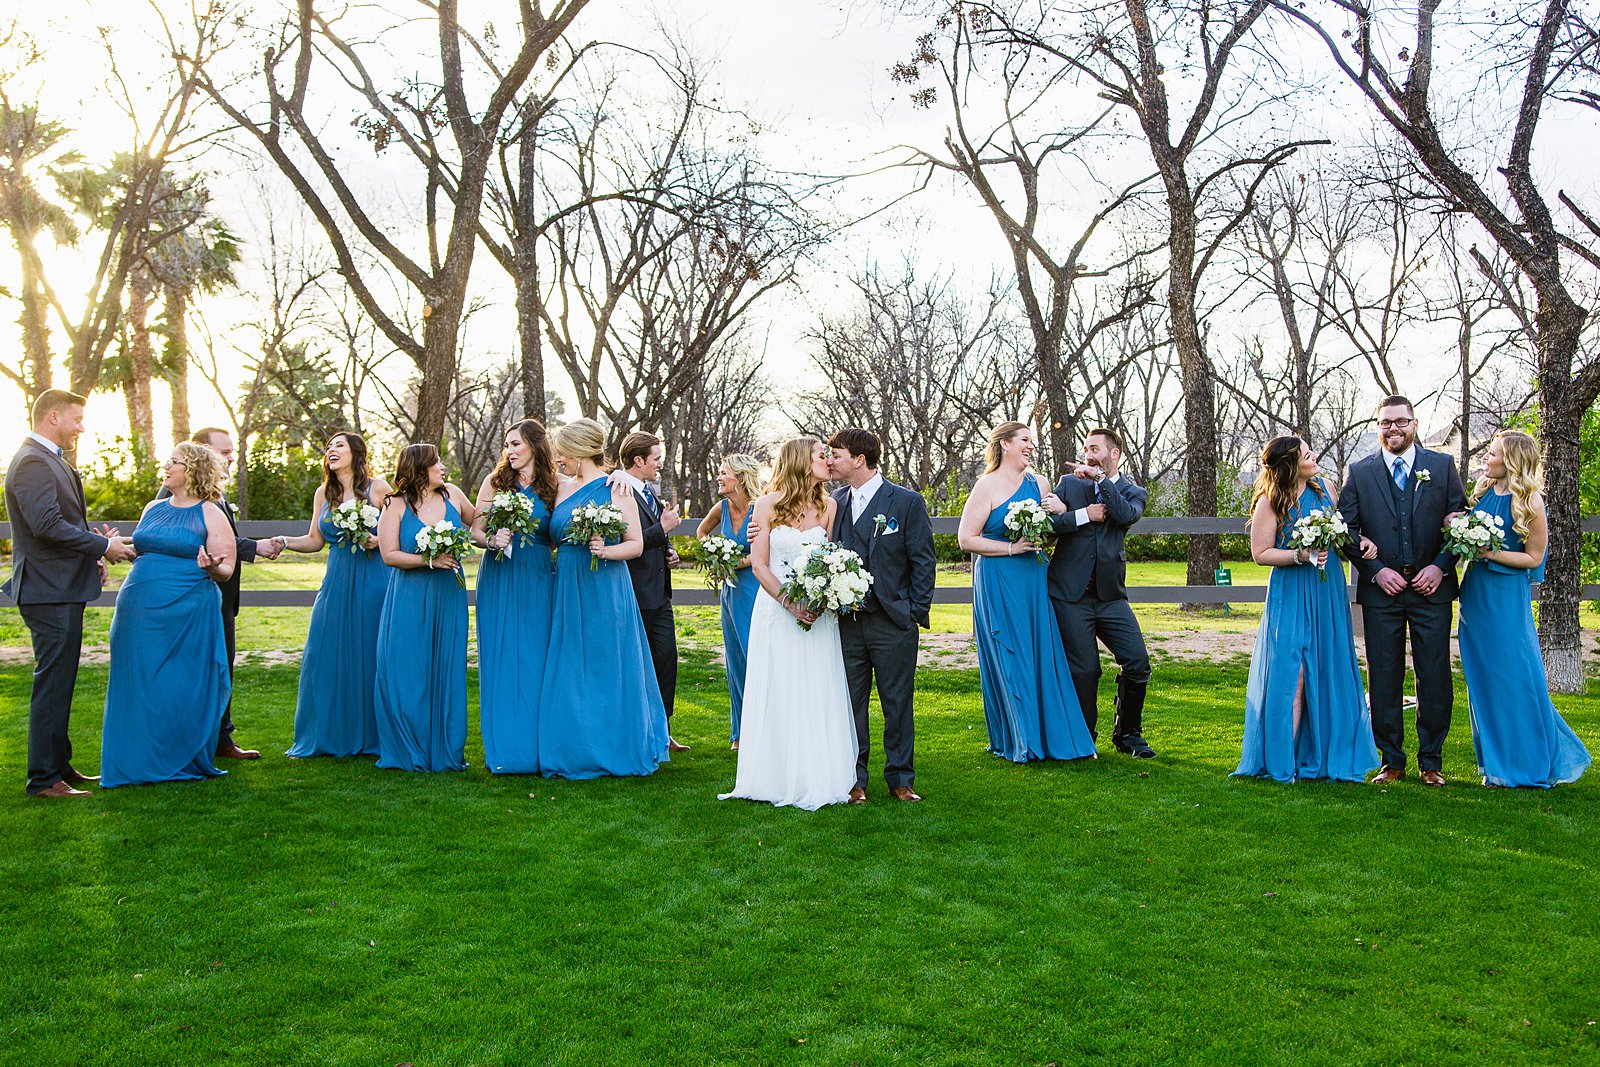 Bridal party having fun together at Venue At The Grove weding by Arizona wedding photographer PMA Photography.